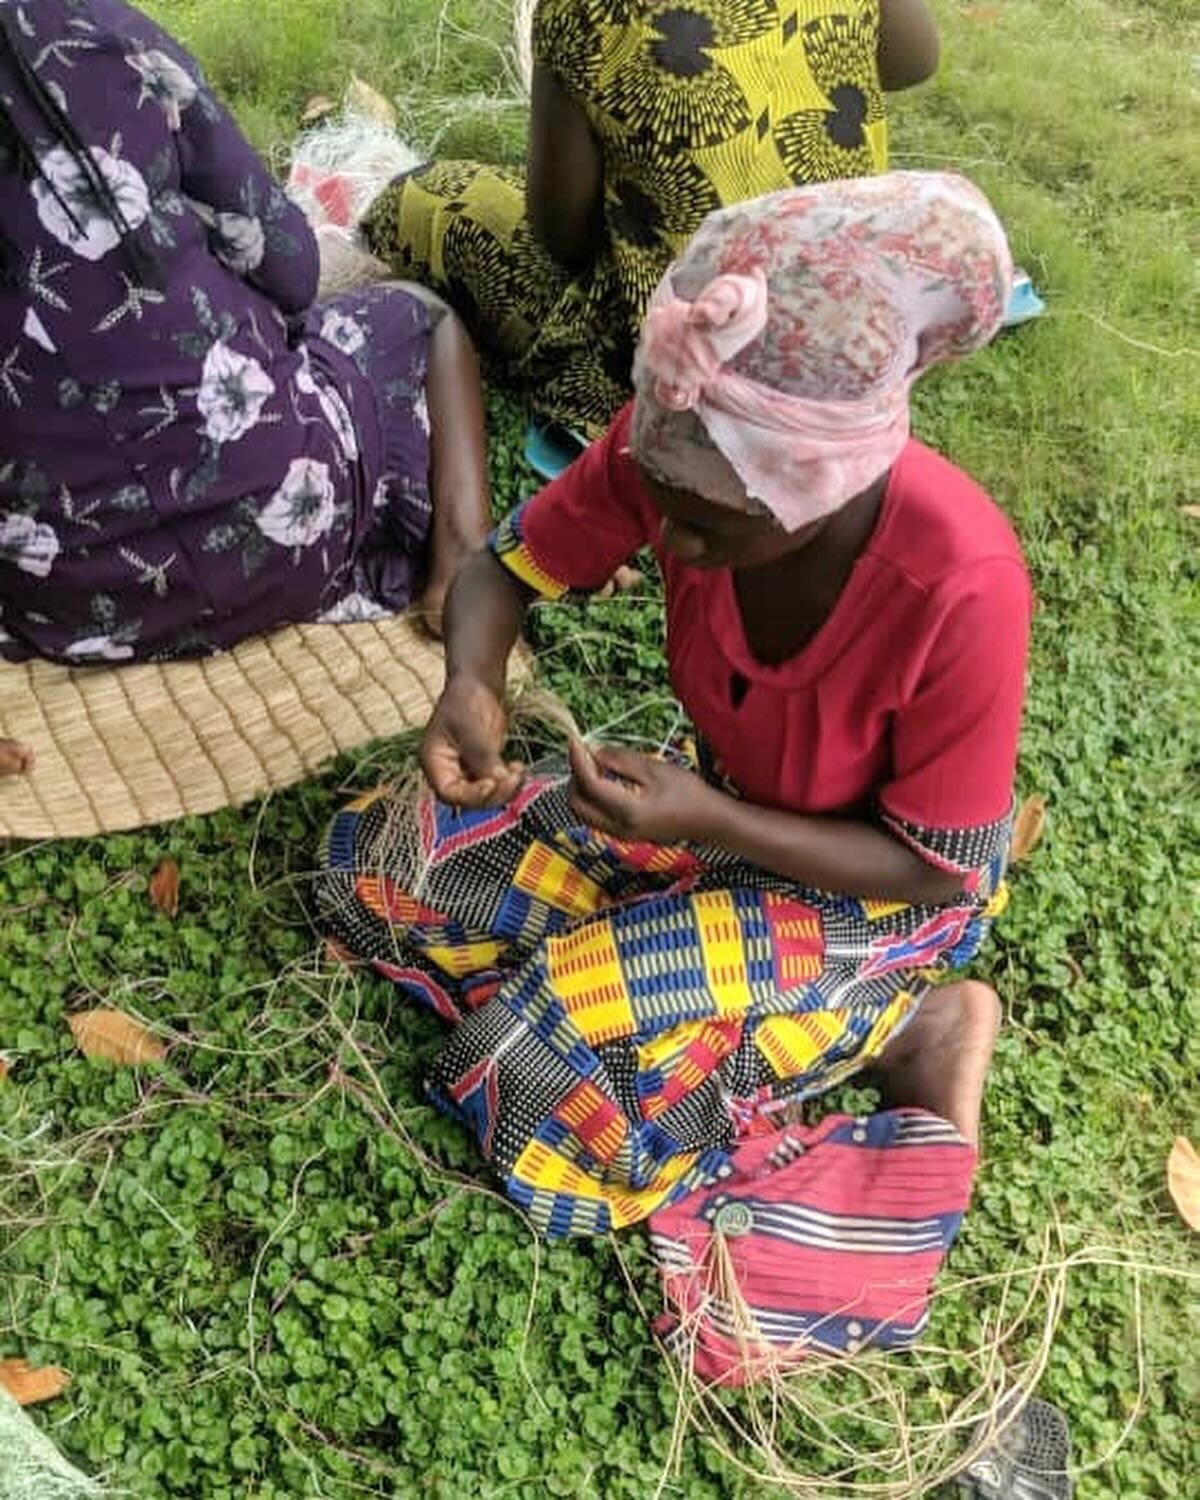 The mothers are still working hard to master their new basket weaving skills, and we are loving to see the progress and ways the young women are supporting one another in the process.

Please join us in praying for our young mothers as they grow in d